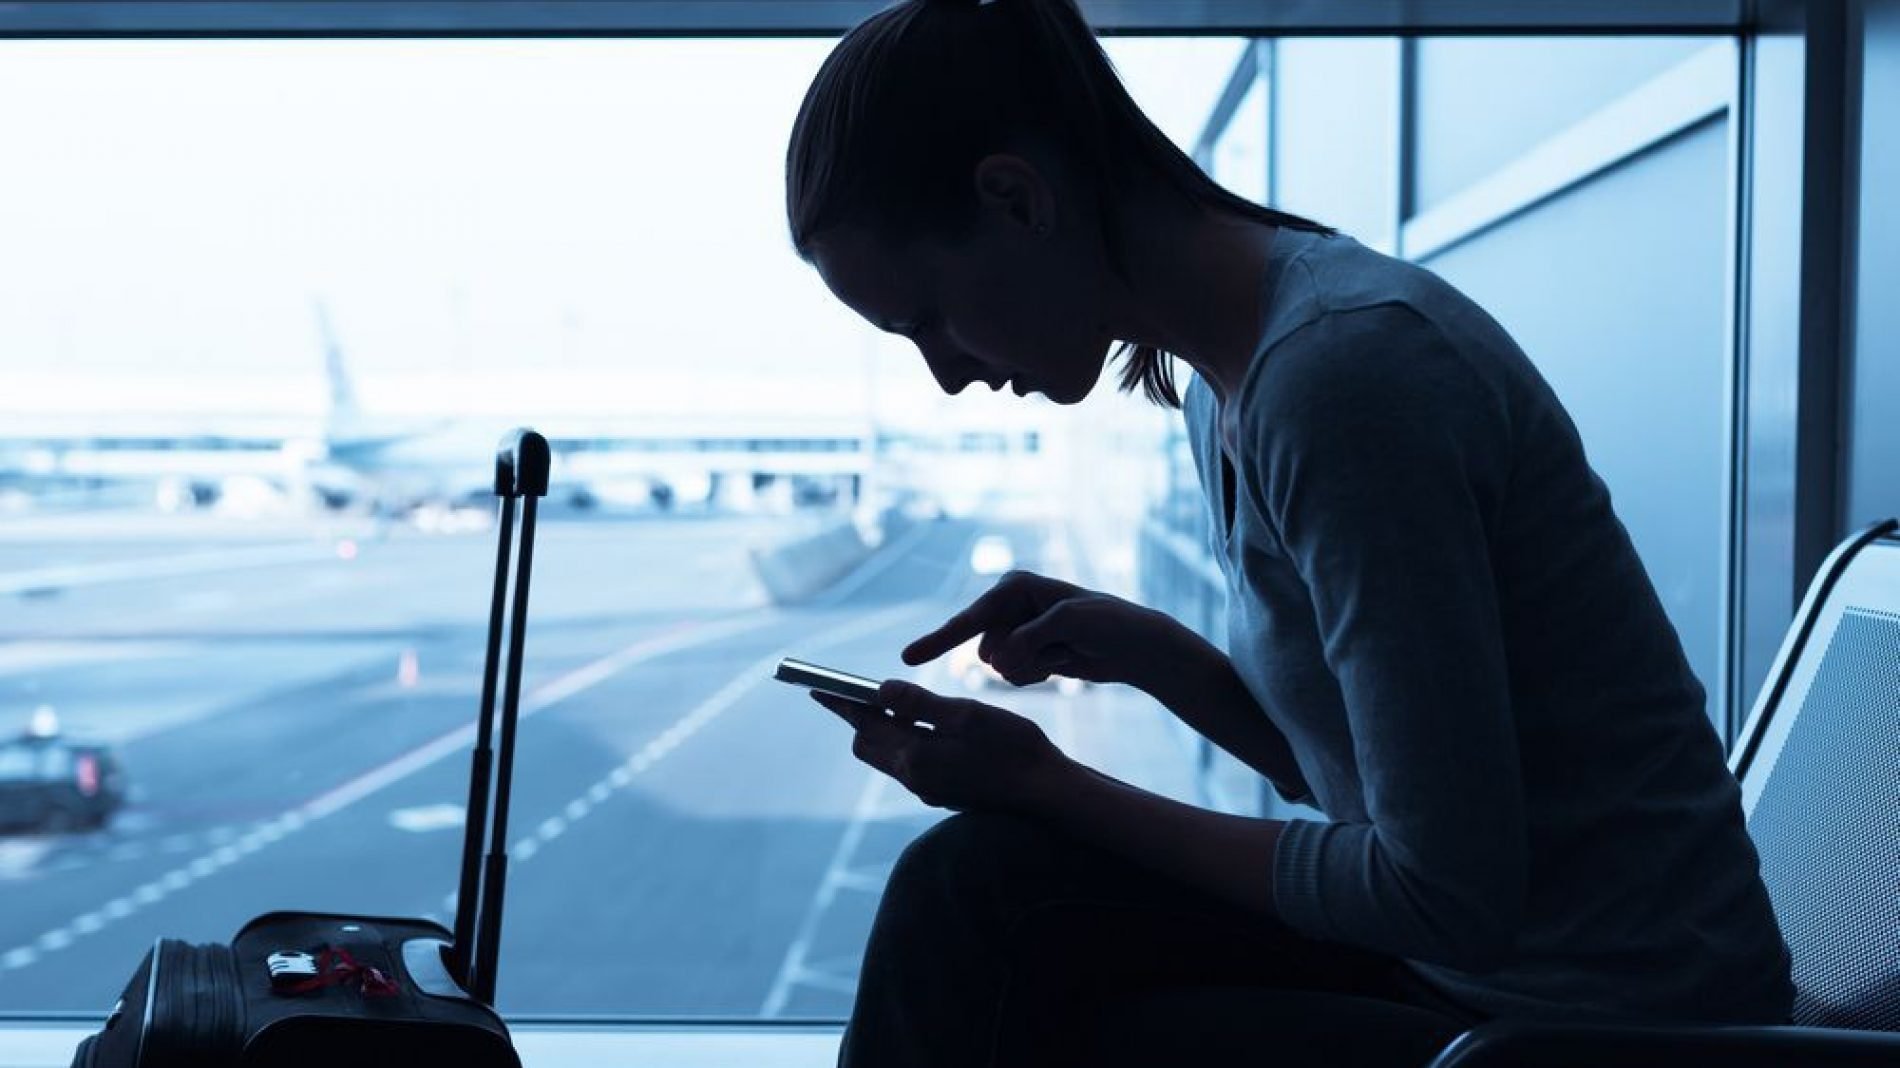 Young woman using her phone in an airport